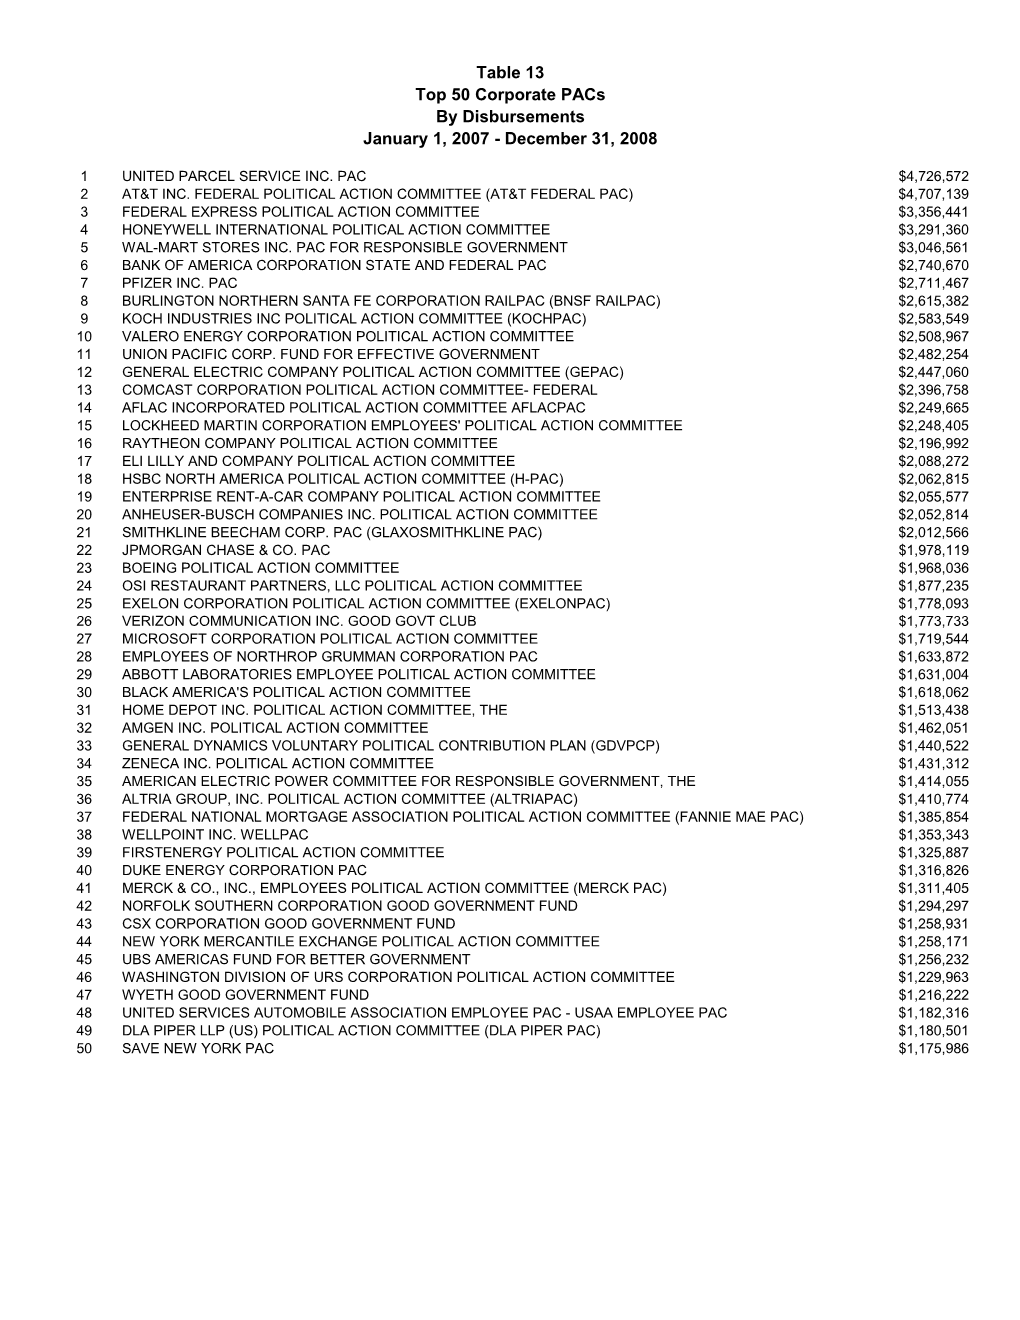 Table 13 Top 50 Corporate Pacs by Disbursements January 1, 2007 - December 31, 2008